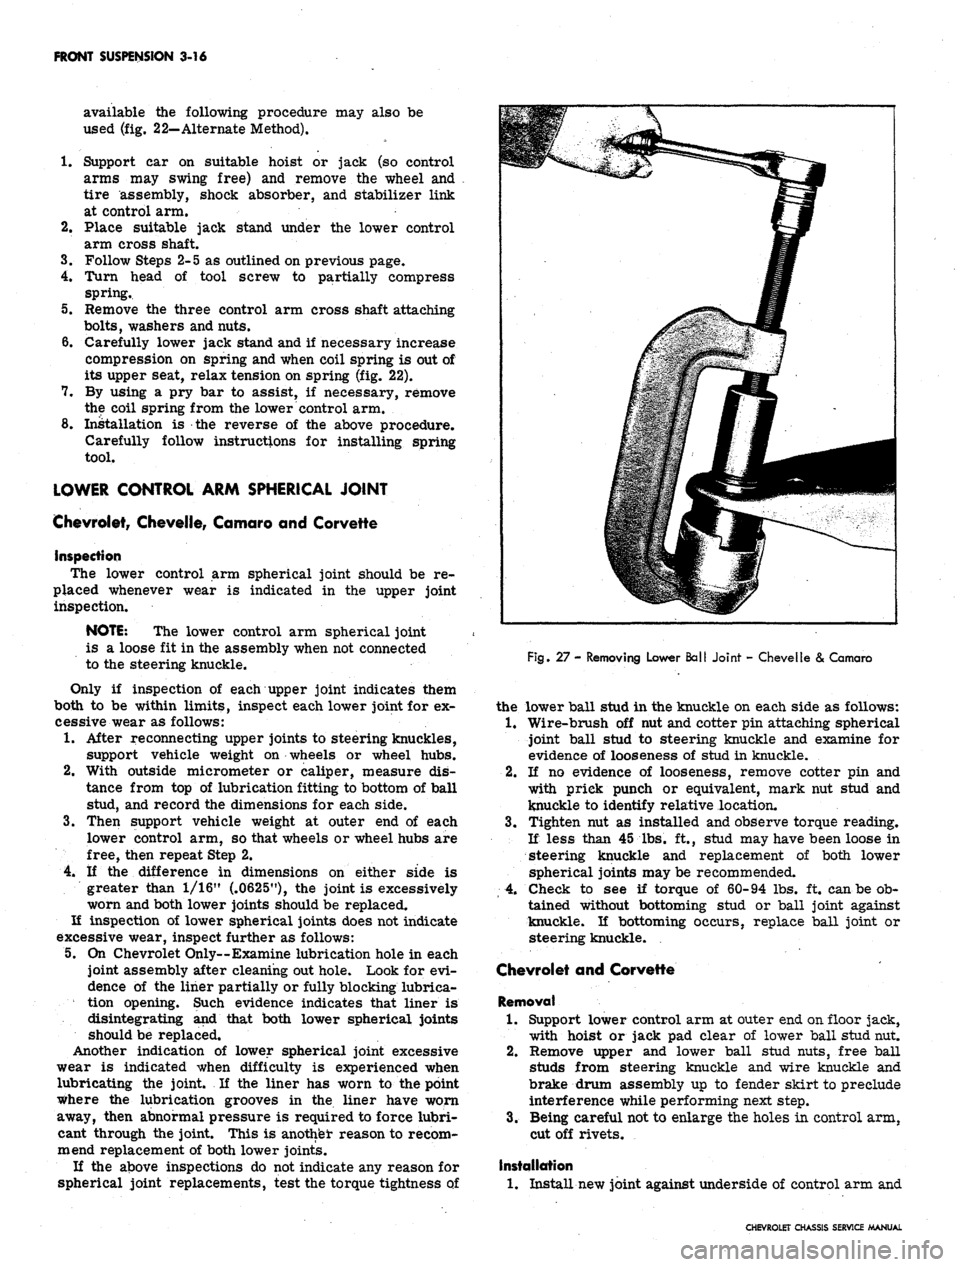 CHEVROLET CAMARO 1967 1.G Chassis User Guide 
FRONT SUSPENSION 3-16

available the following procedure may also be

used (fig. 22-Alternate Method).

1.
 Support car on suitable hoist or jack (so control

arms may swing free) and remove the whee